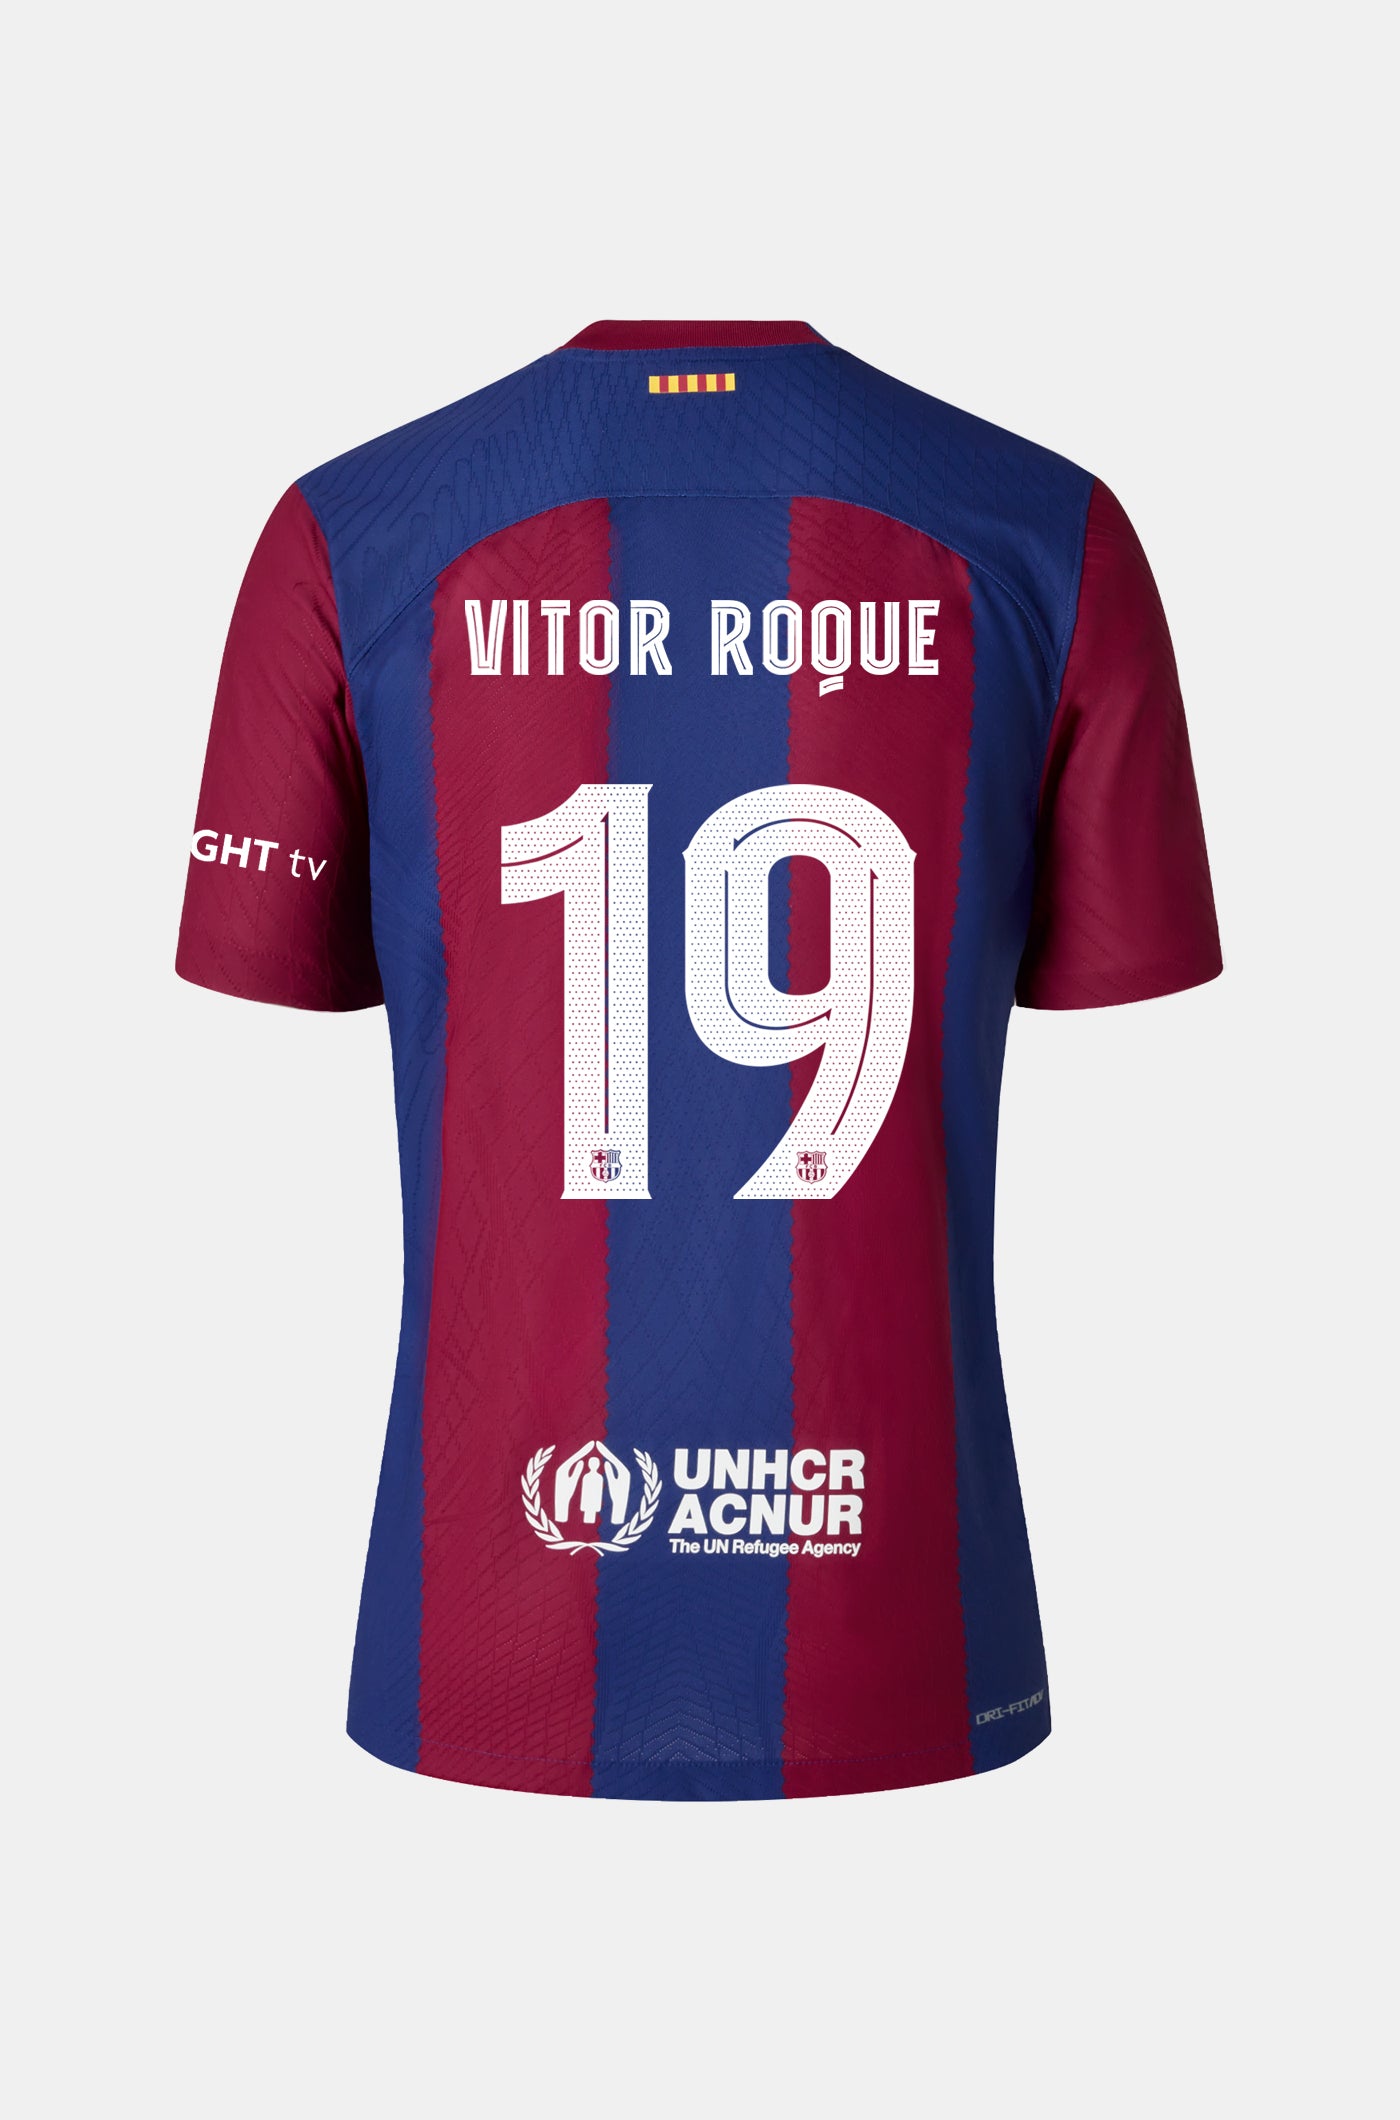 FC Barcelona home shirt 23/24 - Long-sleeve Player's Edition - VITOR ROQUE